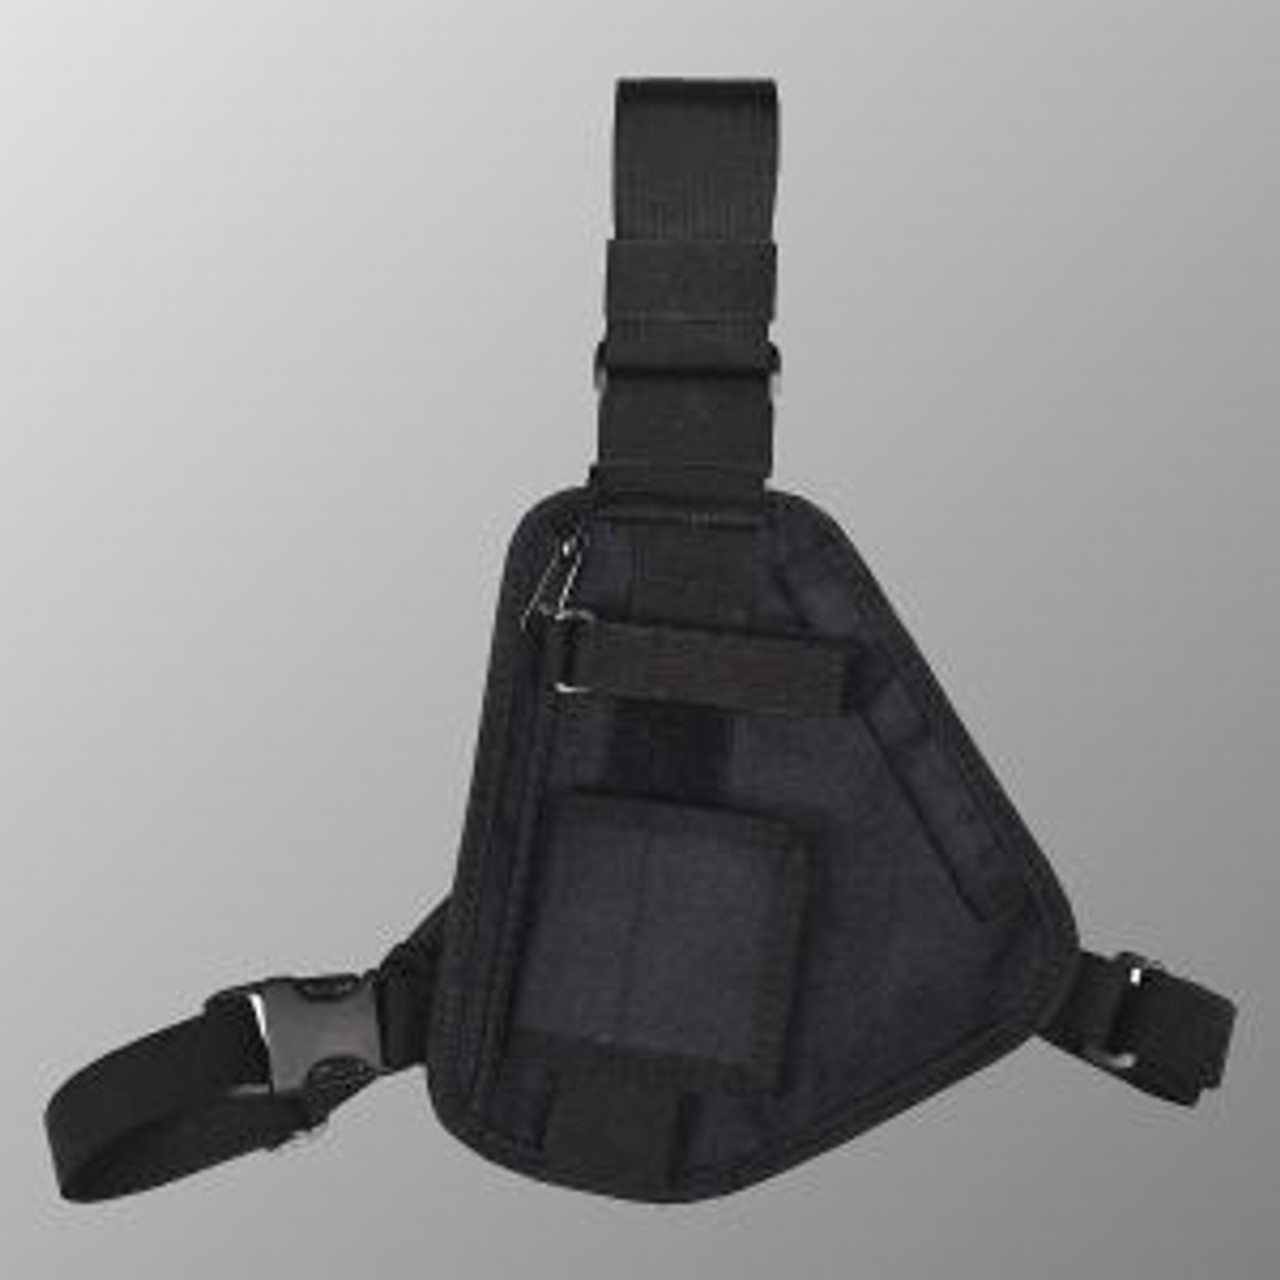 Motorola P50 (3 Cell) 3-Point Chest Harness - Black